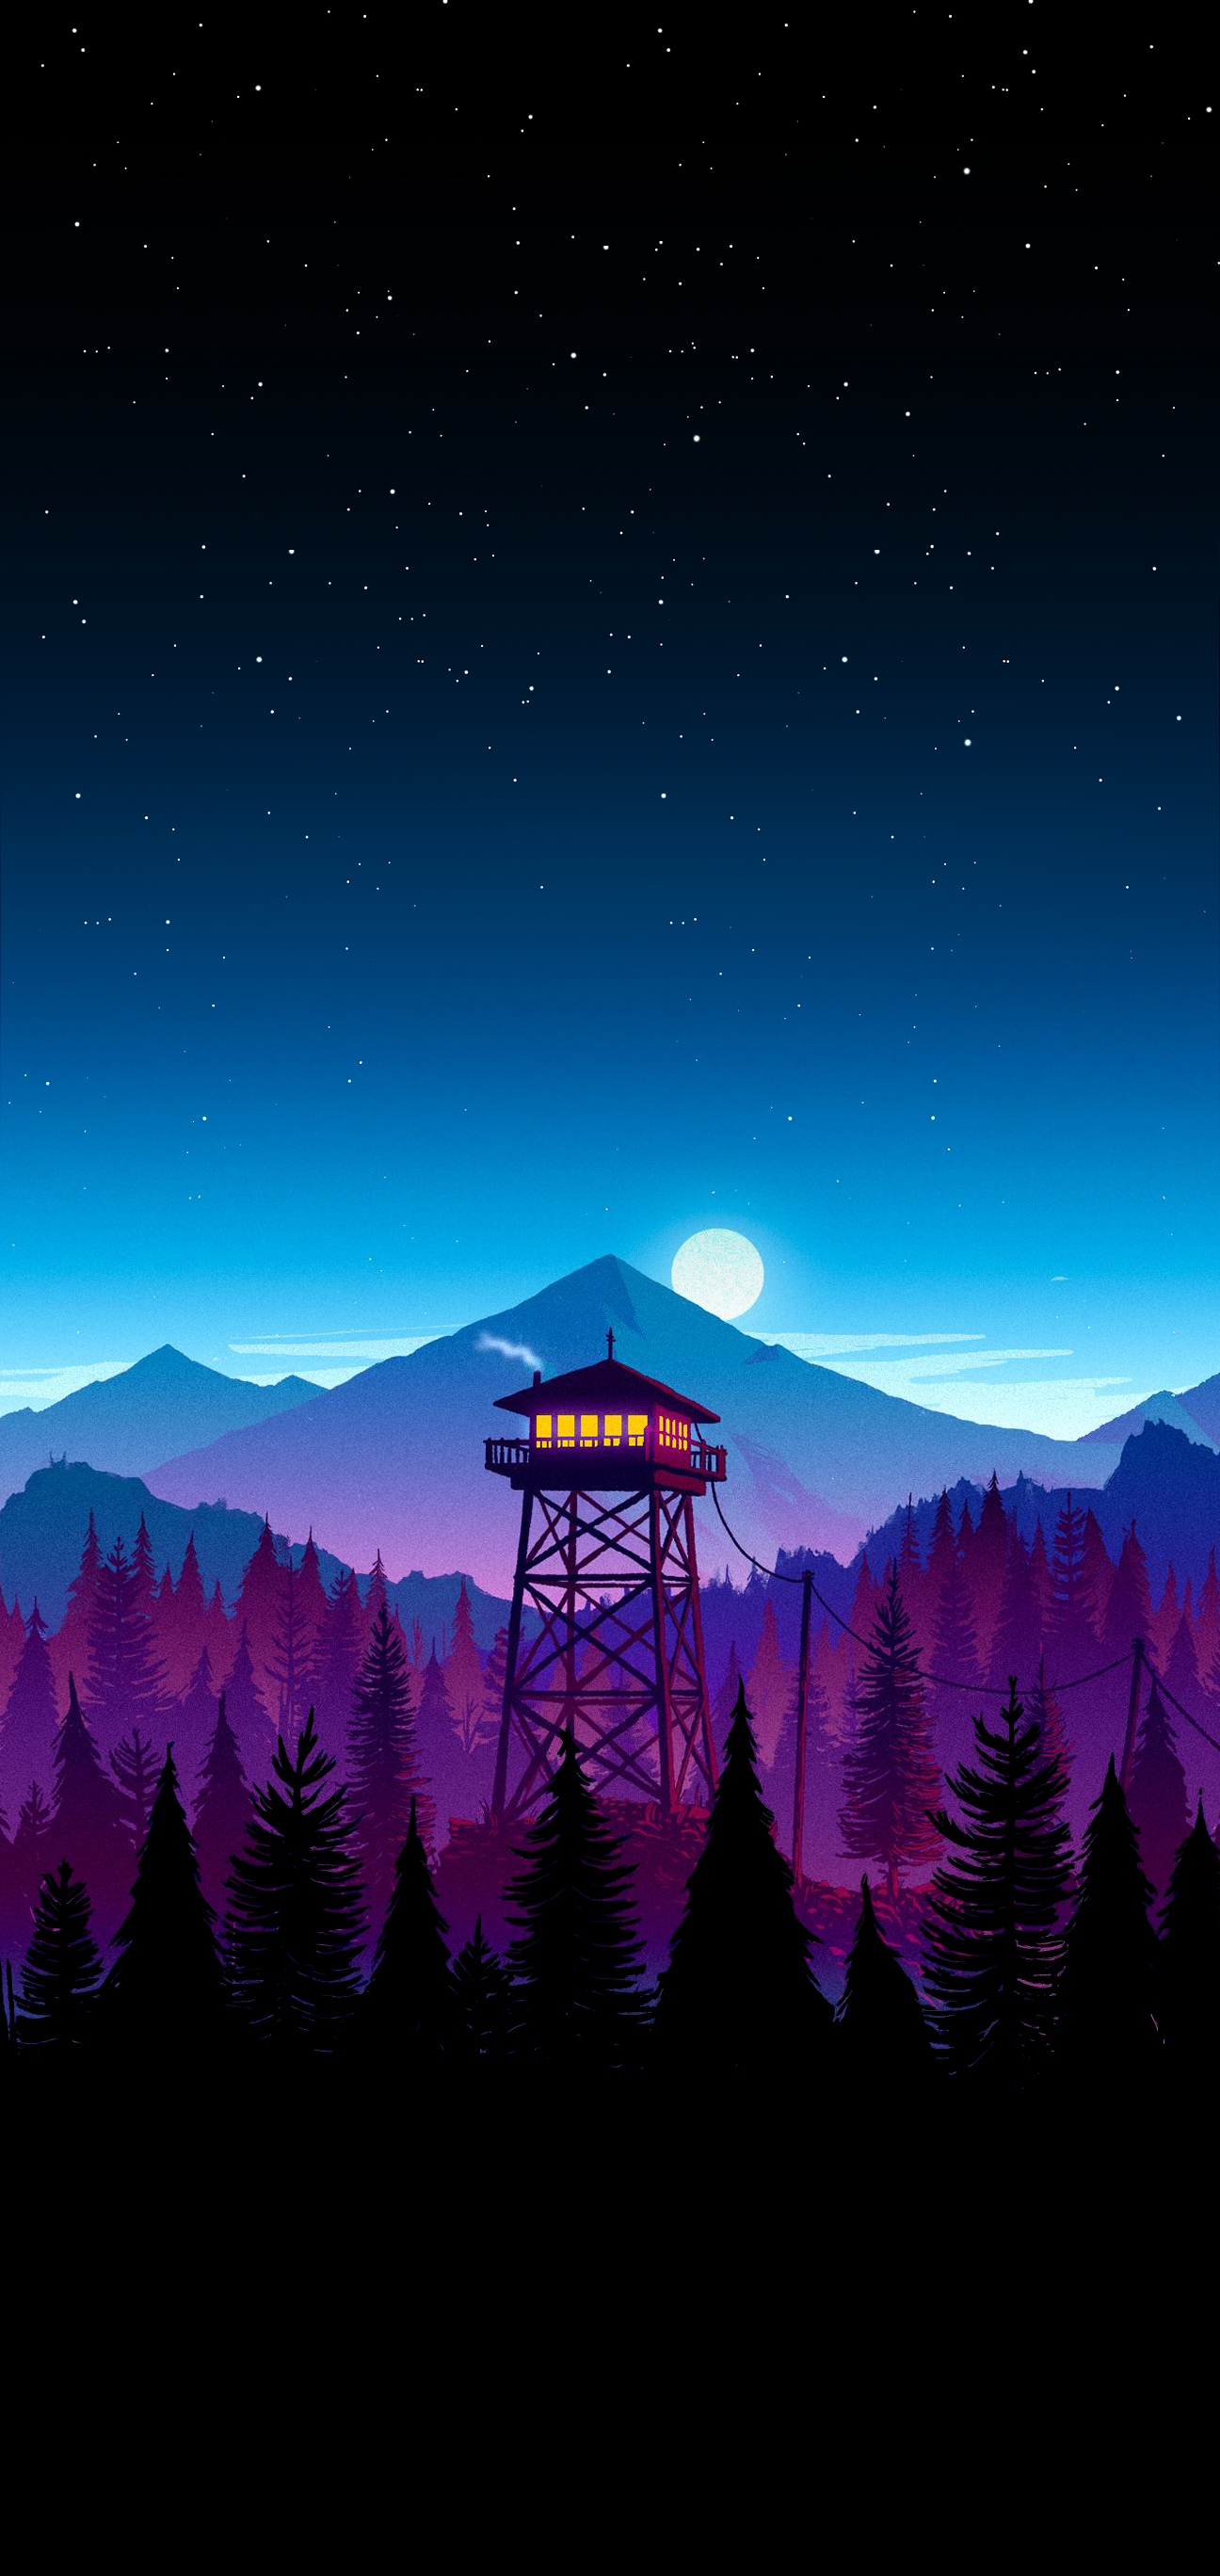 Firewatch Wallpaper I Made For My Iphone X Download - Firewatch Wallpaper Iphone Xs Max , HD Wallpaper & Backgrounds